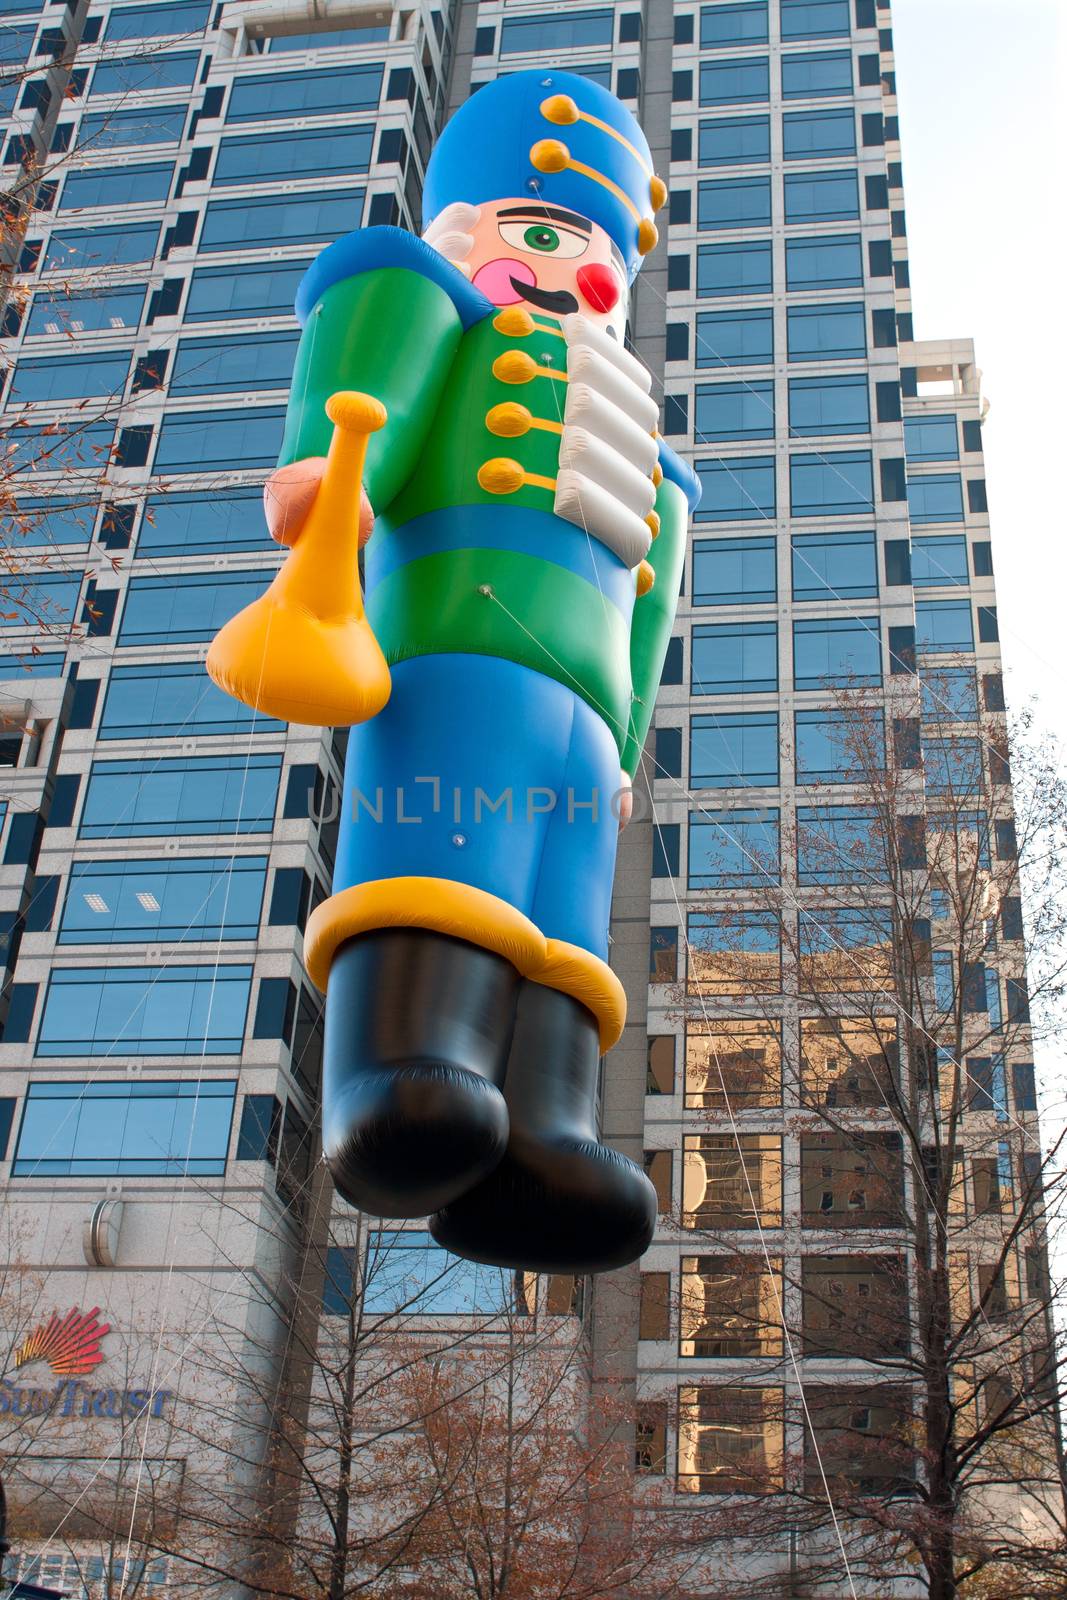 Atlanta, GA, USA - December 1, 2012:  A huge inflated toy soldier balloon moves through the parde route at the annual Atlanta Christmas parade in downtown Atlanta.